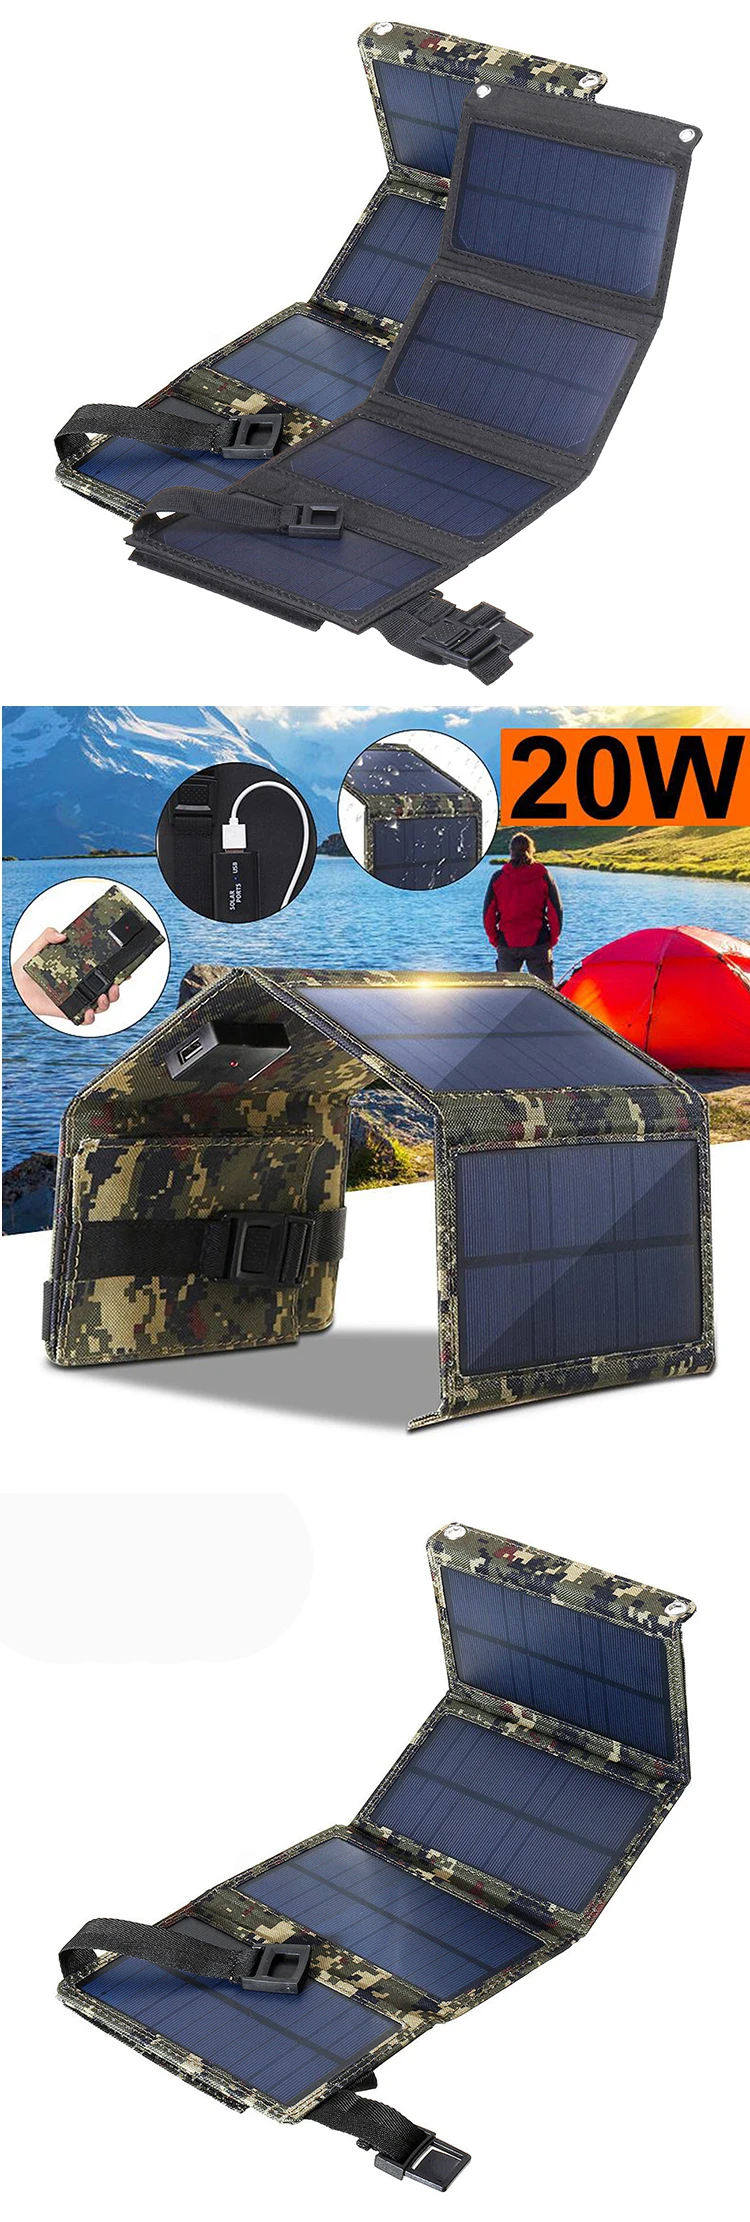 USB 20W 5V Foldable Folding Waterproof Portable Chargeable Solar Panel Plate Charger for Outdoor Travel Camping Hiking